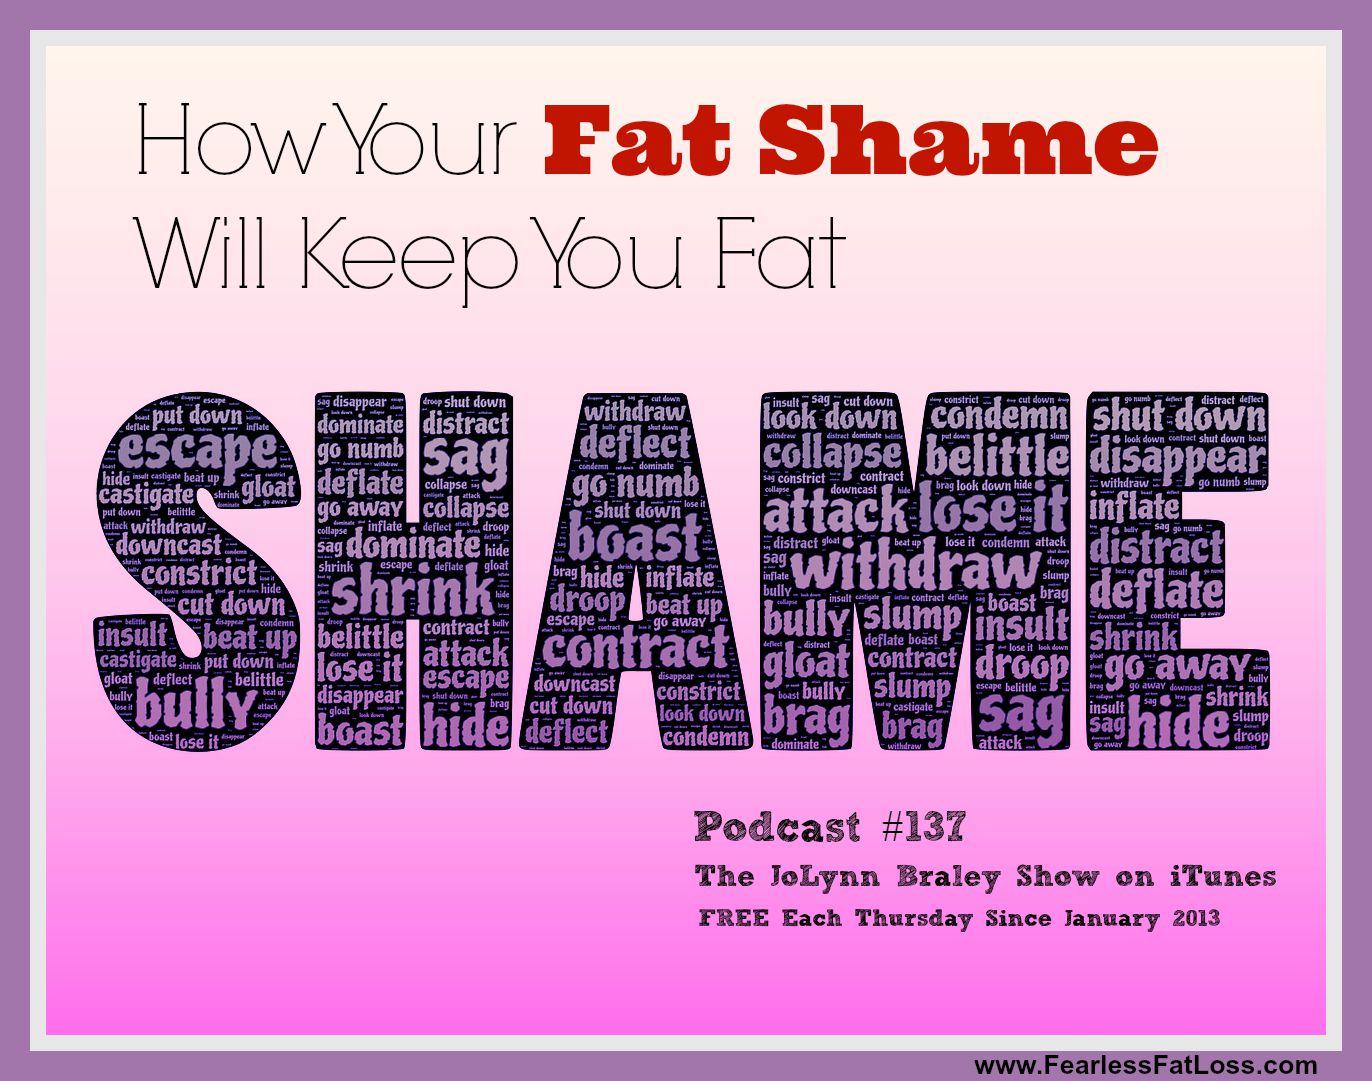 How Your Fat Shame Will Keep You Fat - FearlessFatLoss